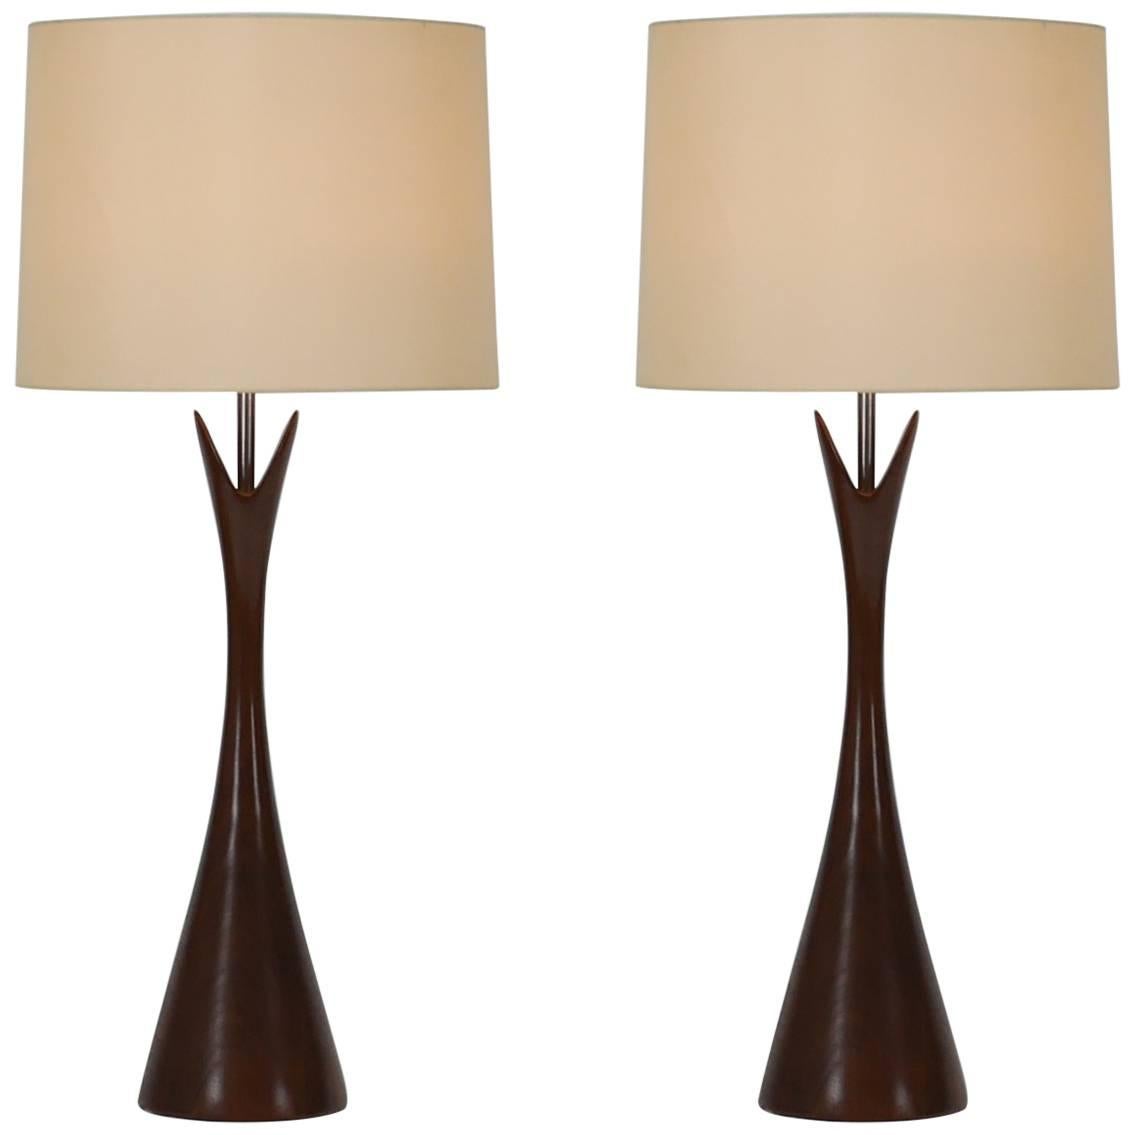 Pair of Large Turned Walnut Hourglass Form Lamps by Laurel